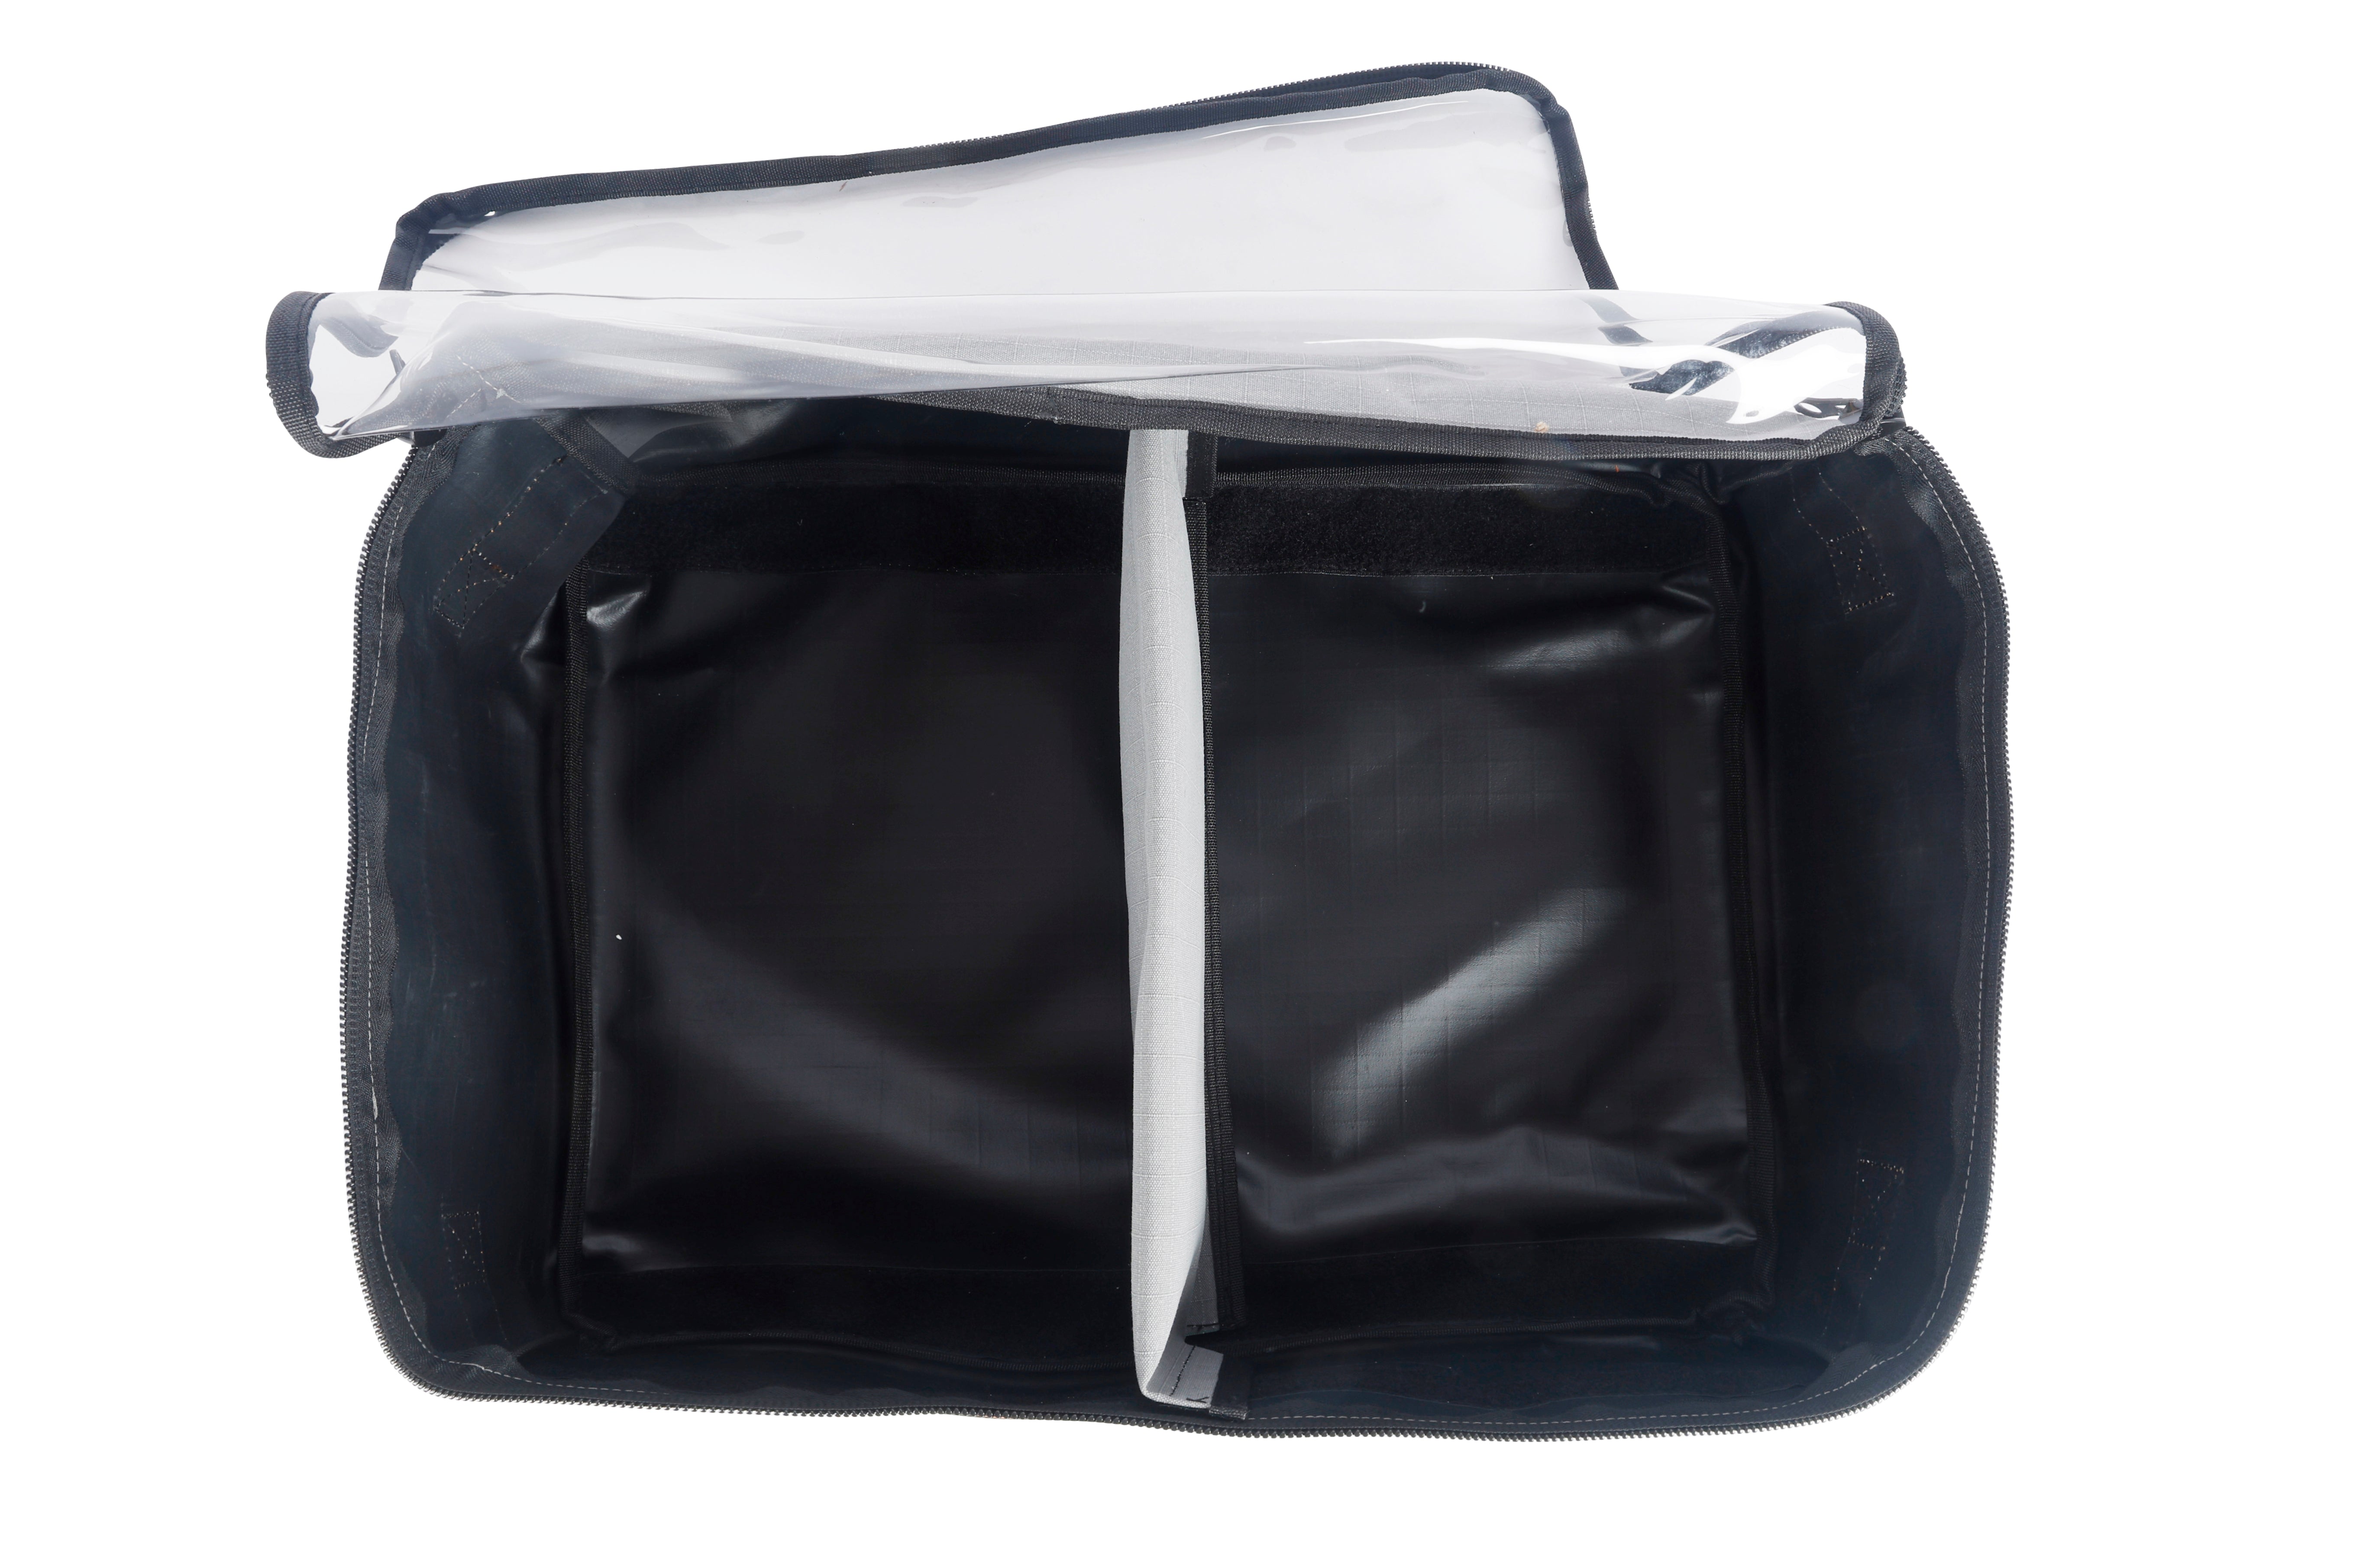 Wildtrak™ Large Clear Top Storage Bag for Camping and 4WD Off-Roading - Heavy-Duty 400GSM Ripstop Canvas